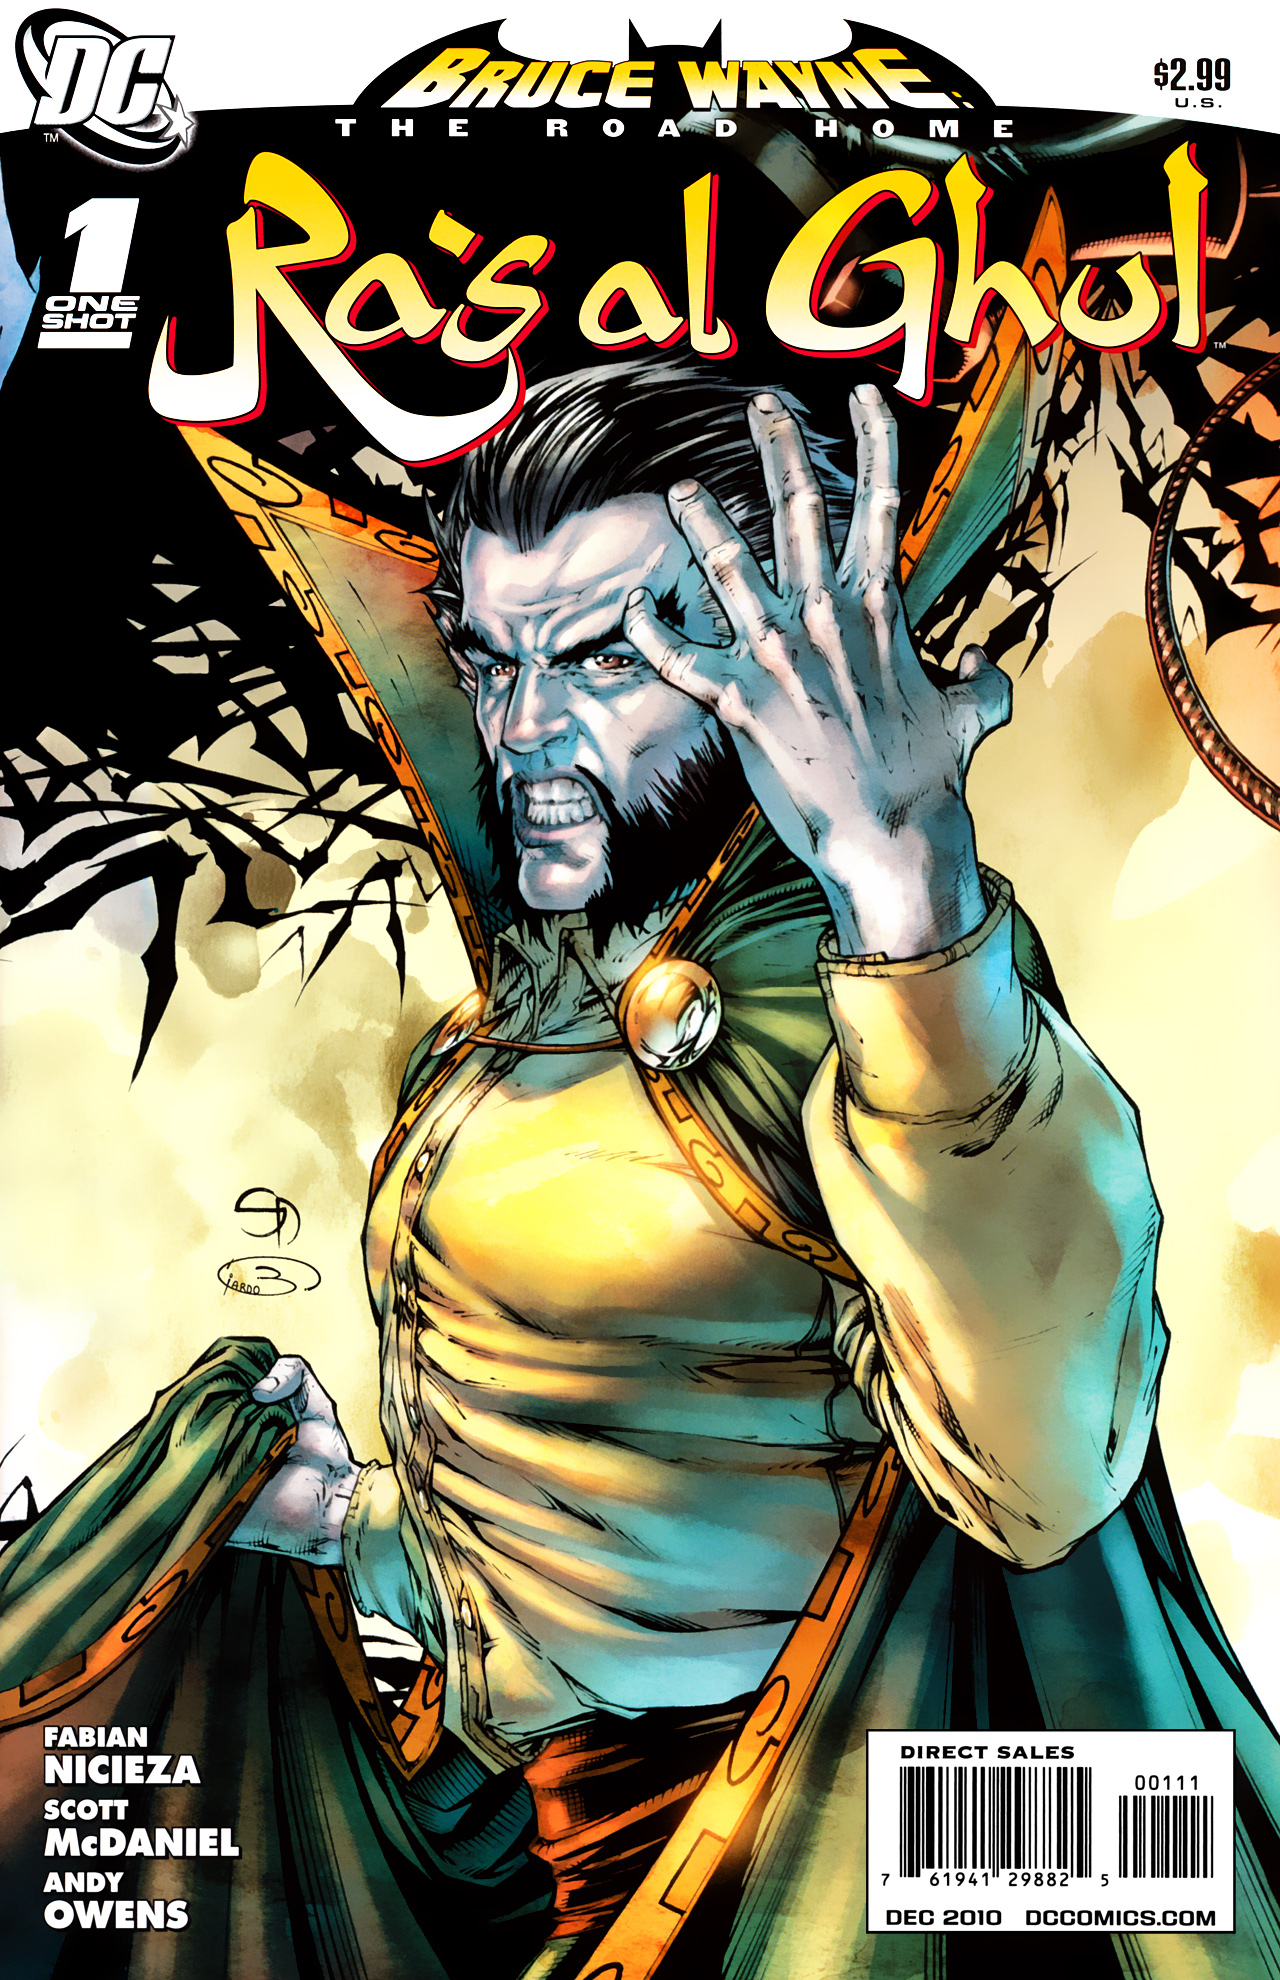 Read online Bruce Wayne: The Road Home comic -  Issue # Issue Ra's al Ghul - 1